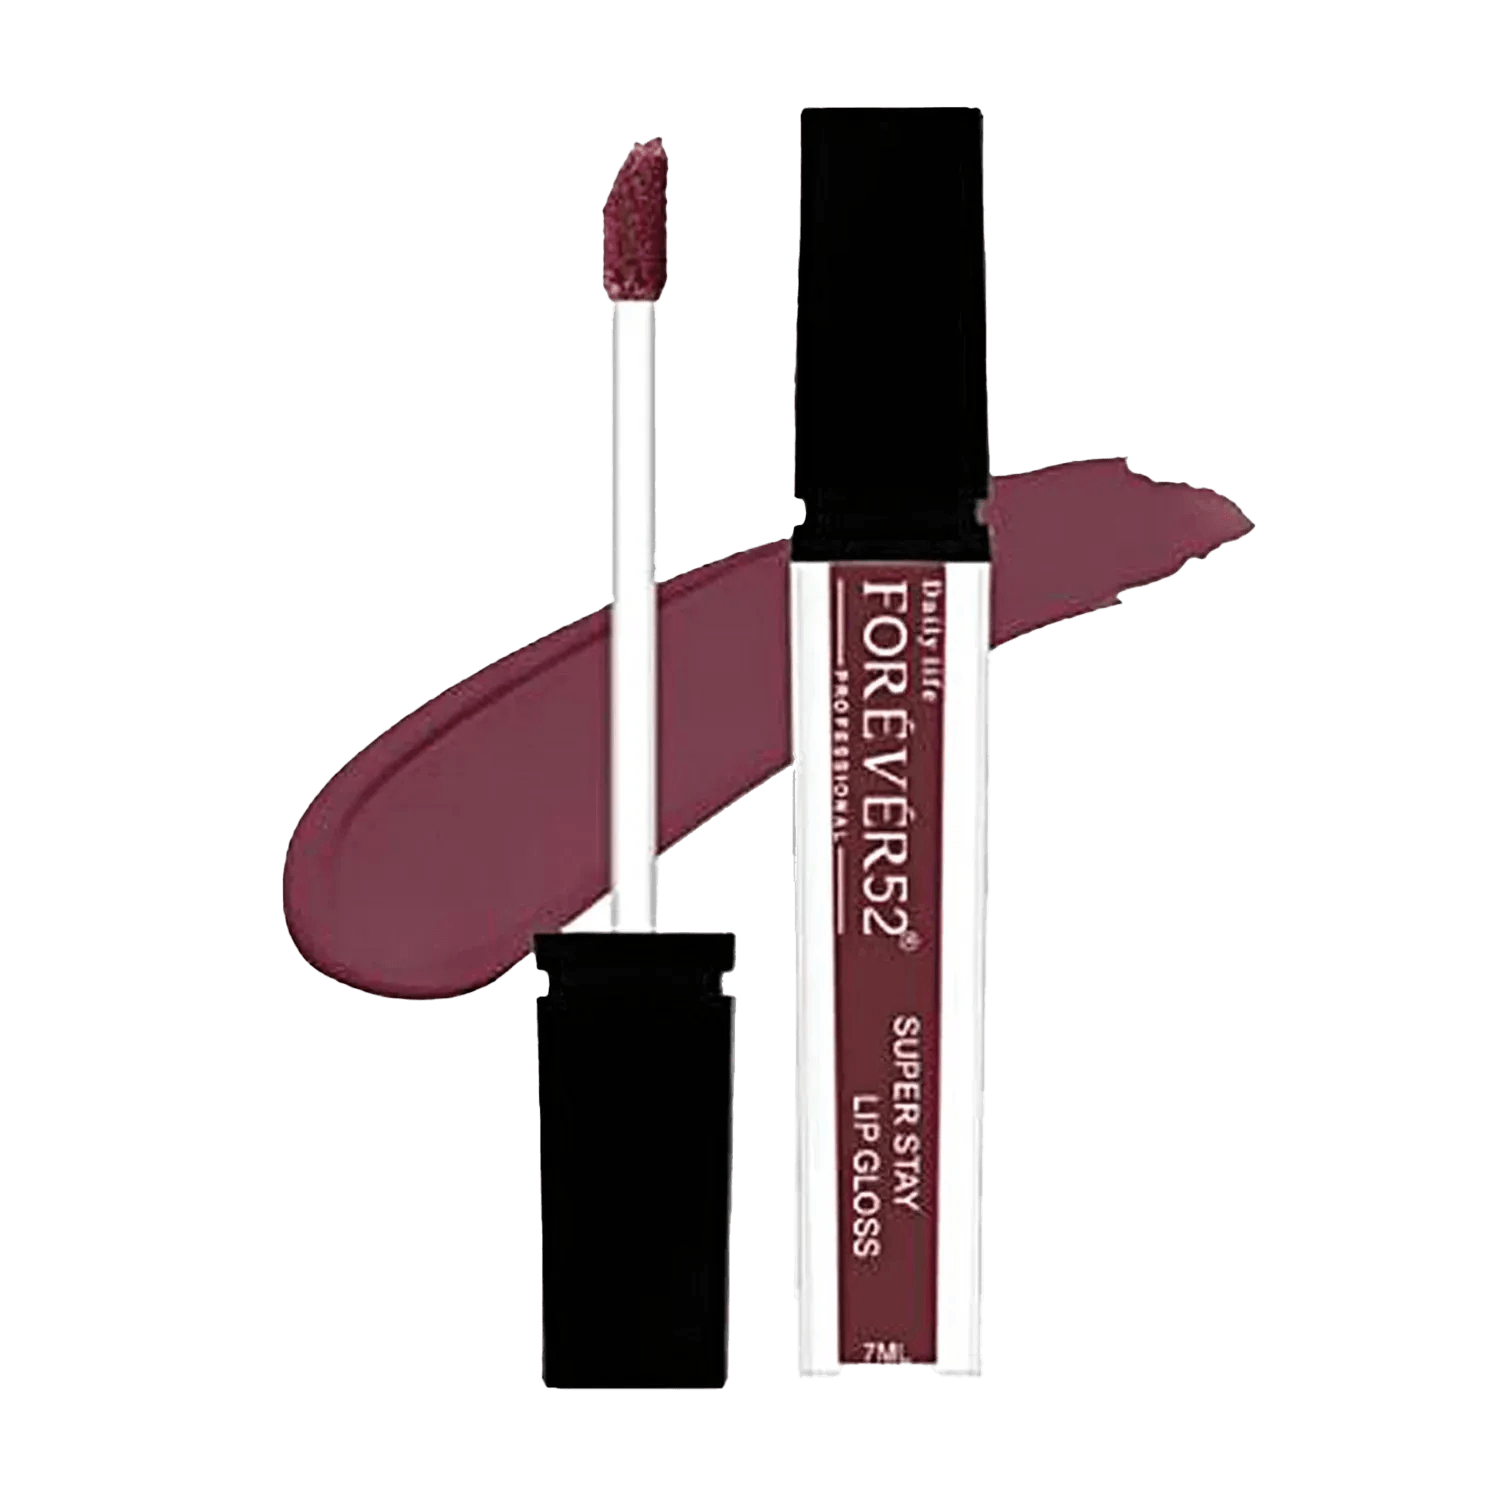 Daily Life Forever52 | Daily Life Forever52 Super Stay Lipgloss SLC019 (7gm)